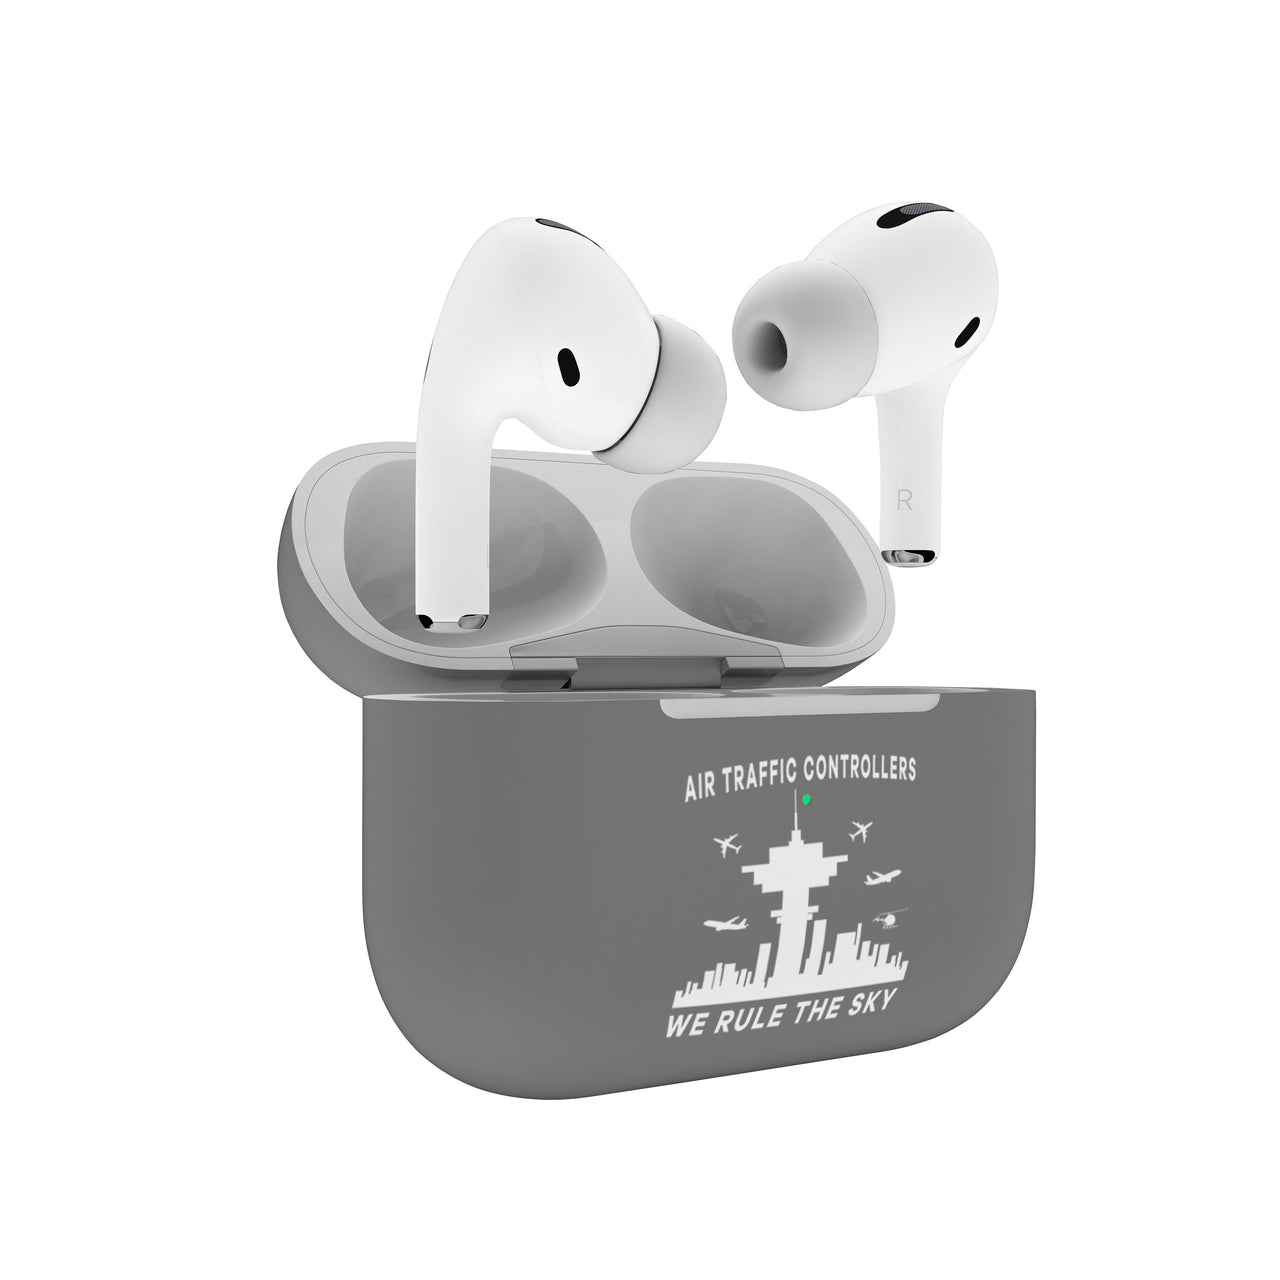 Air Traffic Controllers - We Rule The Sky Designed AirPods "Pro" Cases